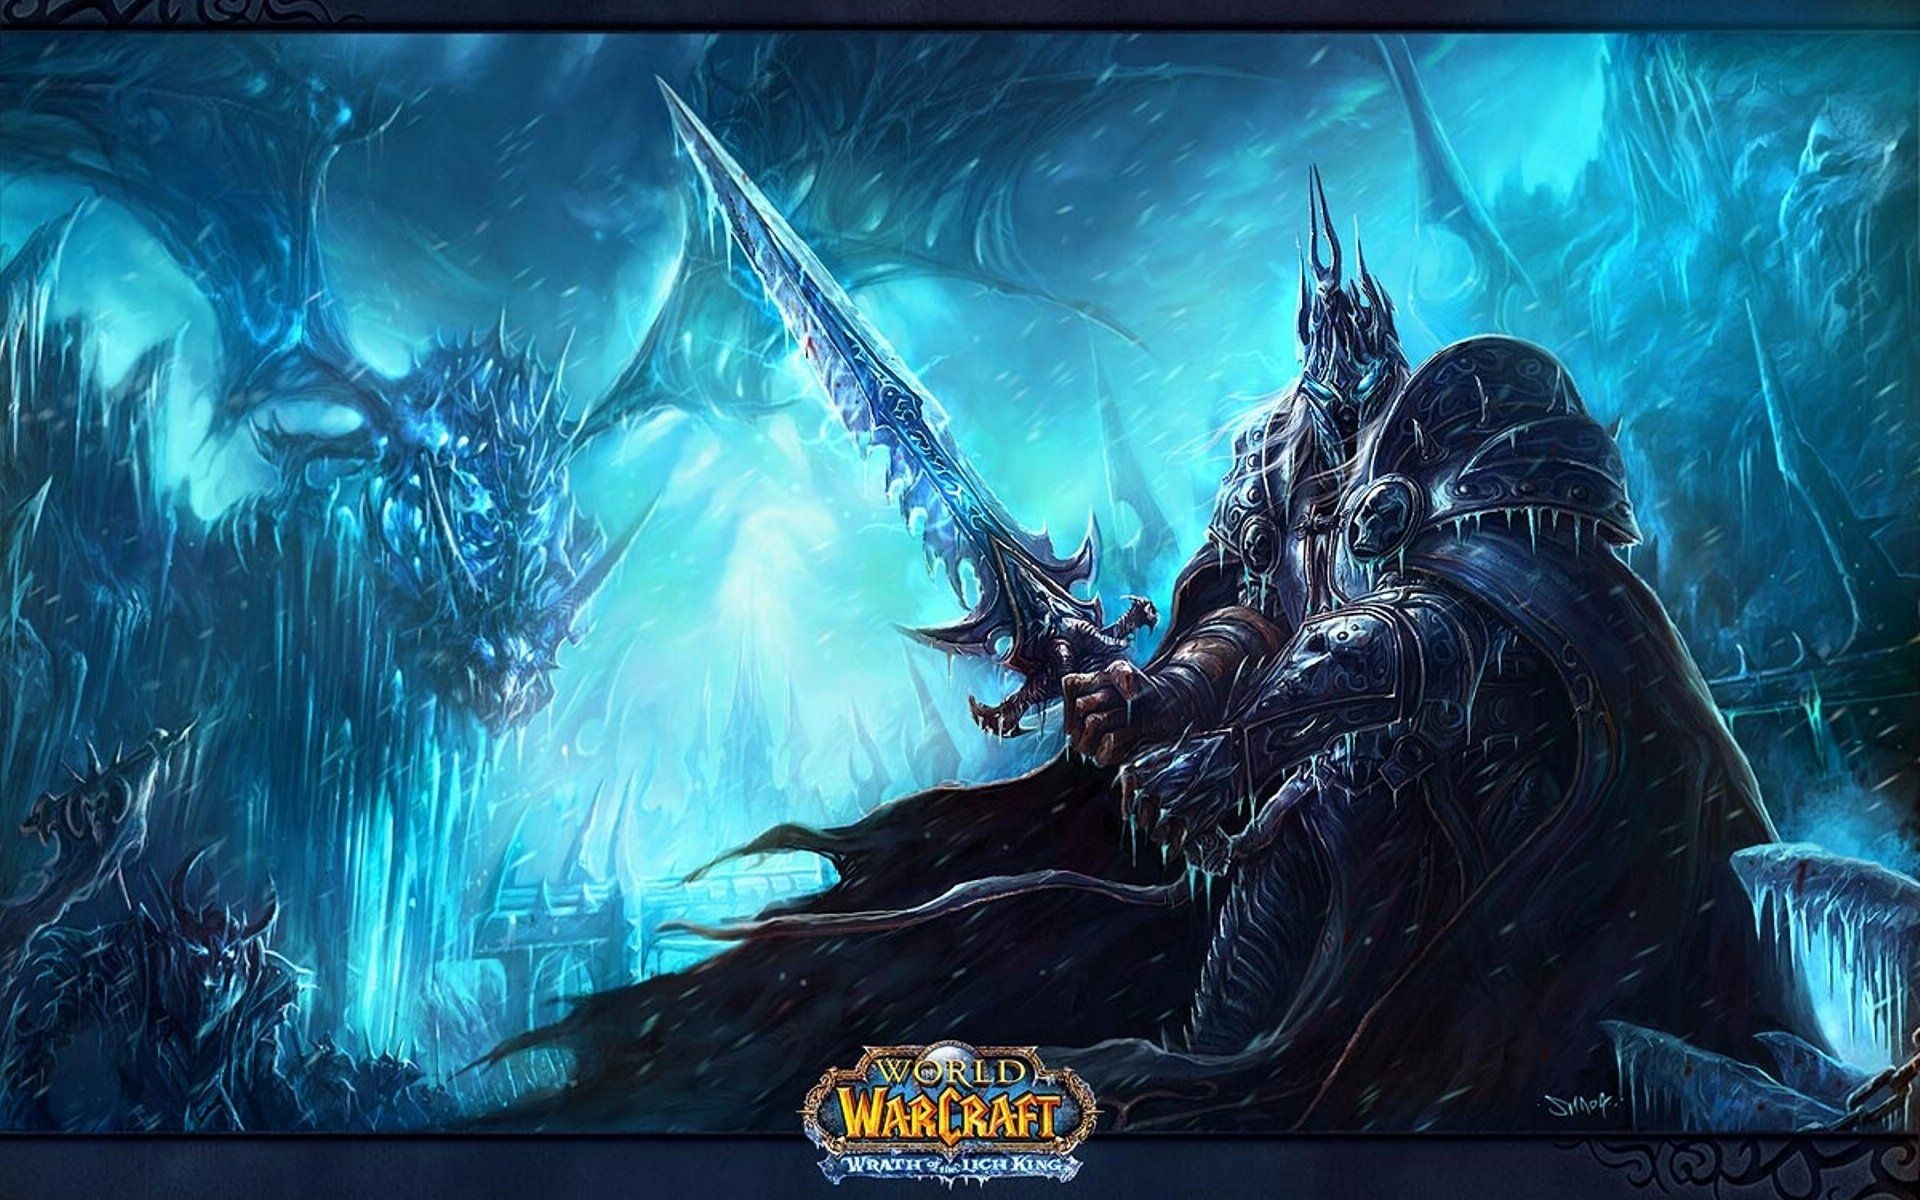 Wrath of the Lich King, Video game wallpapers, 4K HD quality, Gaming immersion, 1920x1200 HD Desktop